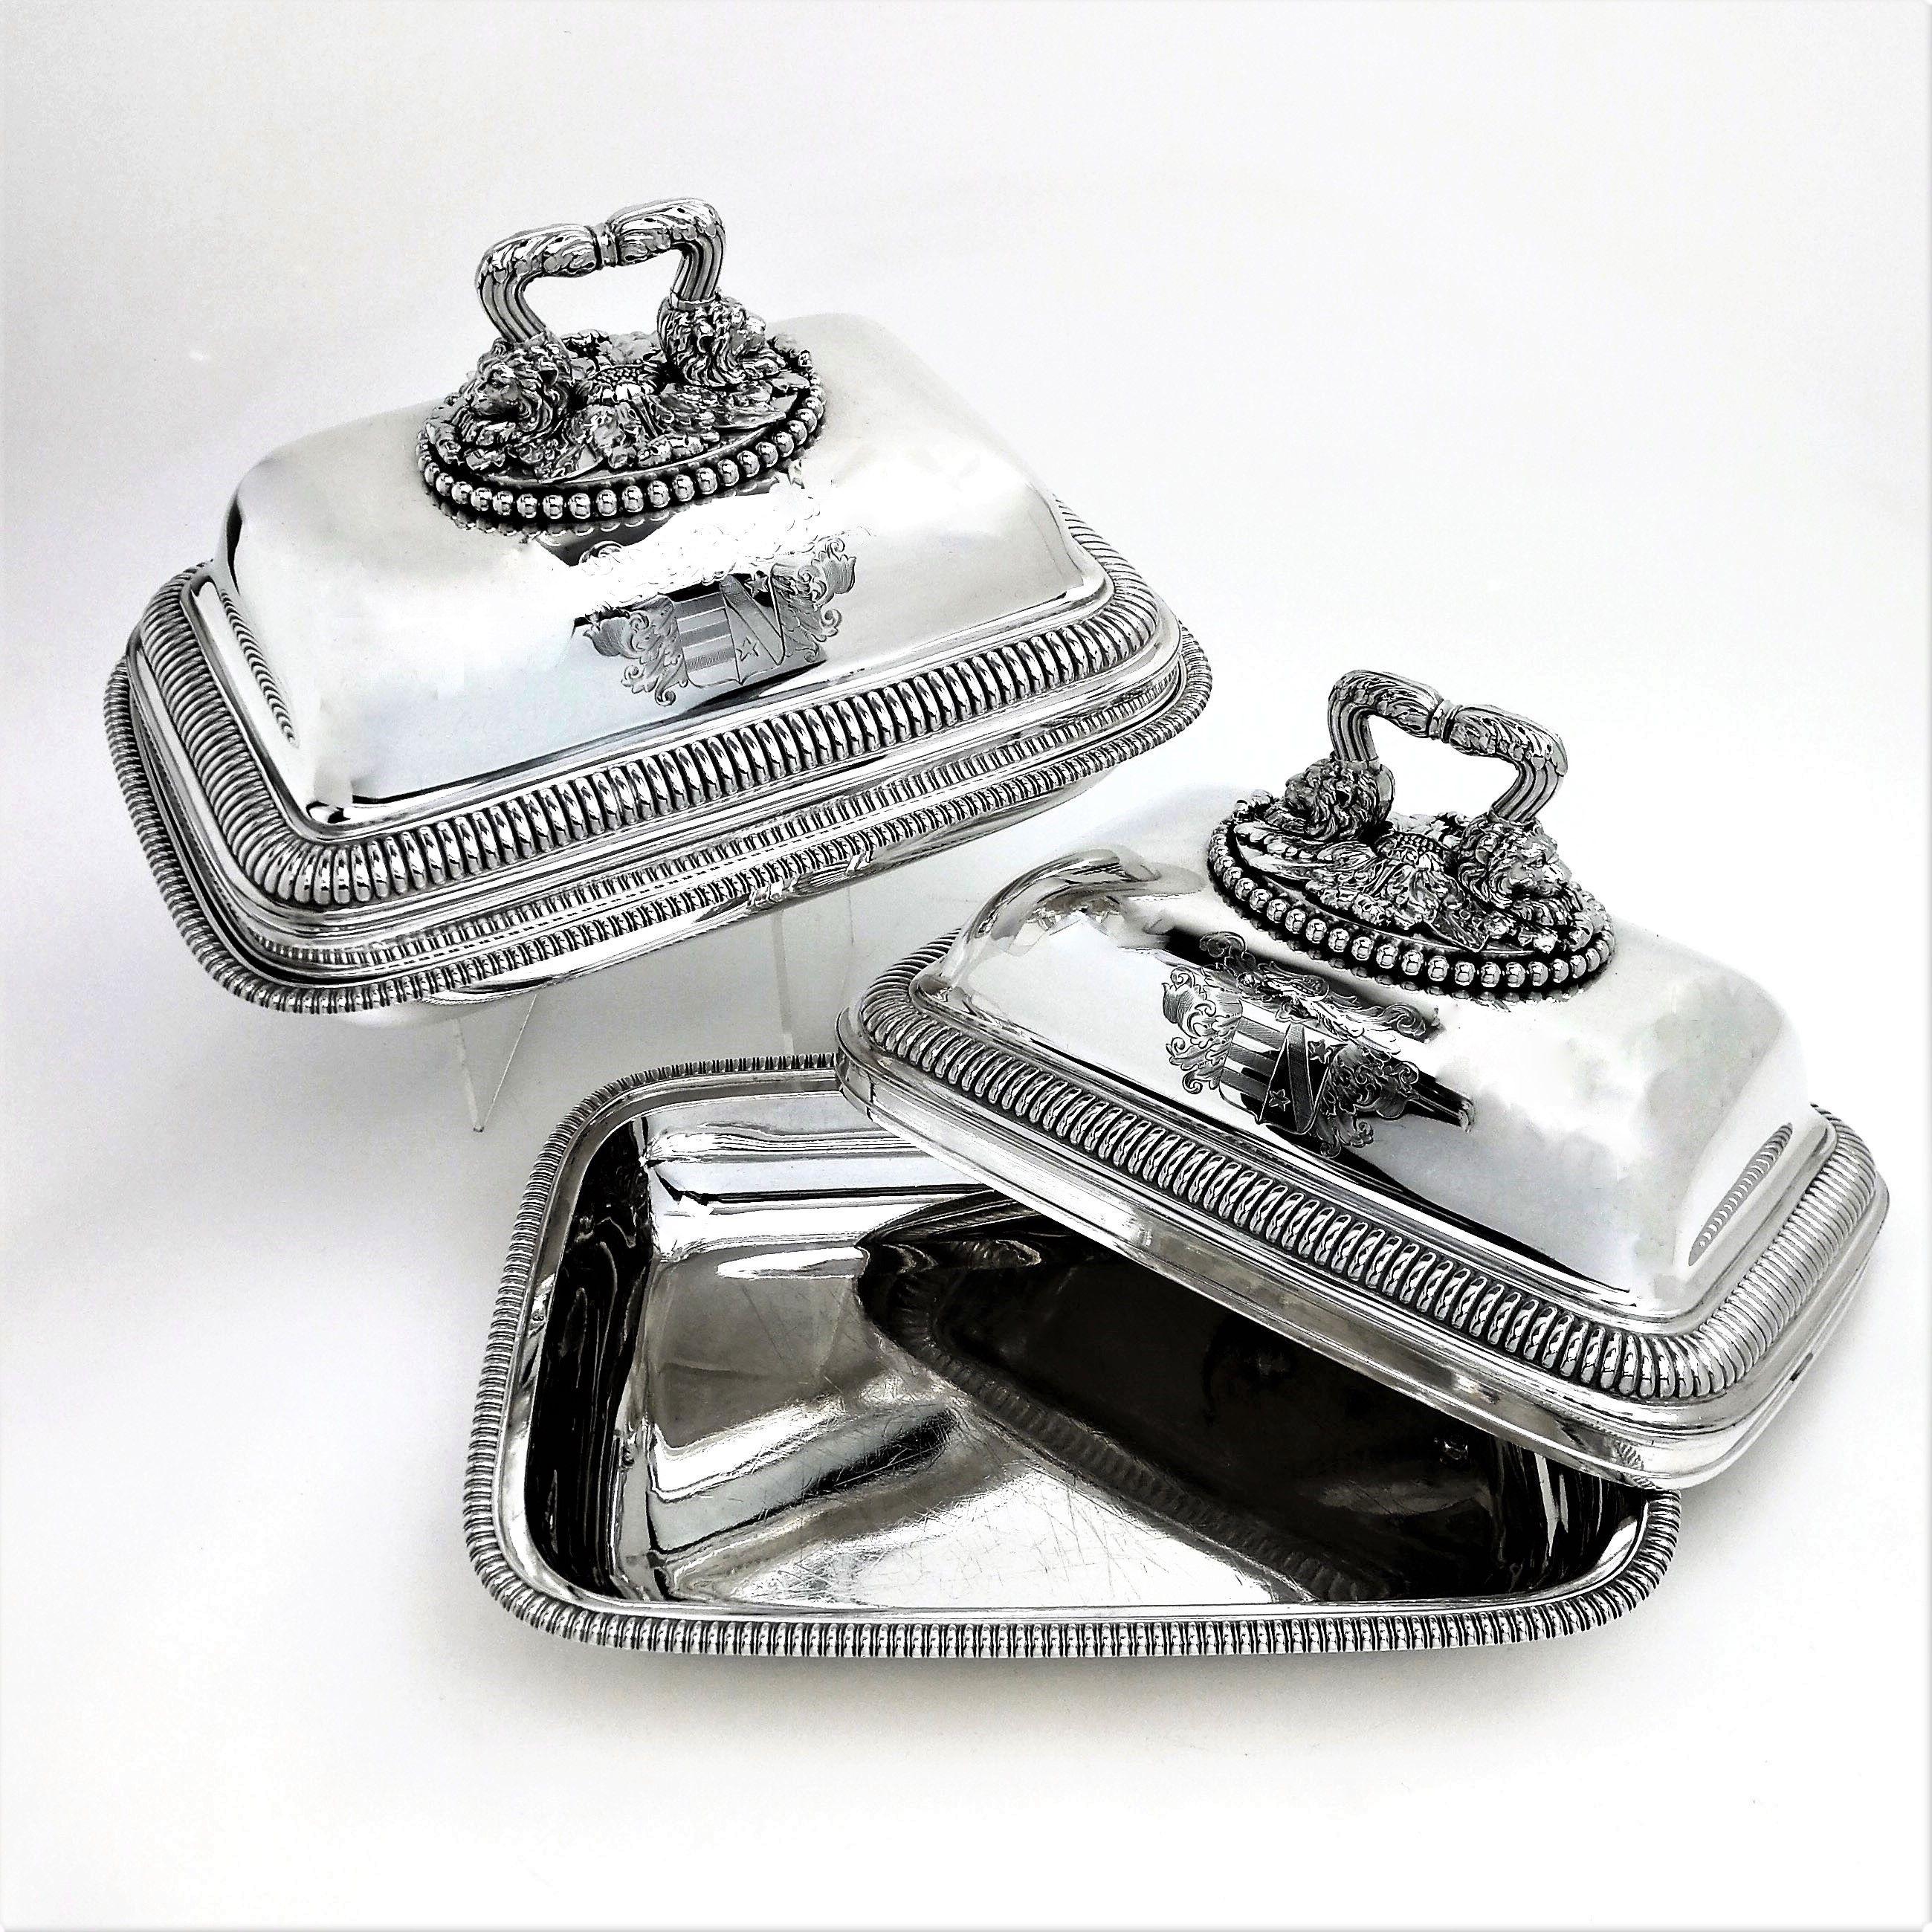 A magnificent pair of Paul Storr Antique Solid Silver Entree Dishes. These impressive Antique George III Covered Dishes are rectangular in shape and have tall domed lids topped with monumental handles. The Handles are acanthus leaf topped ending in